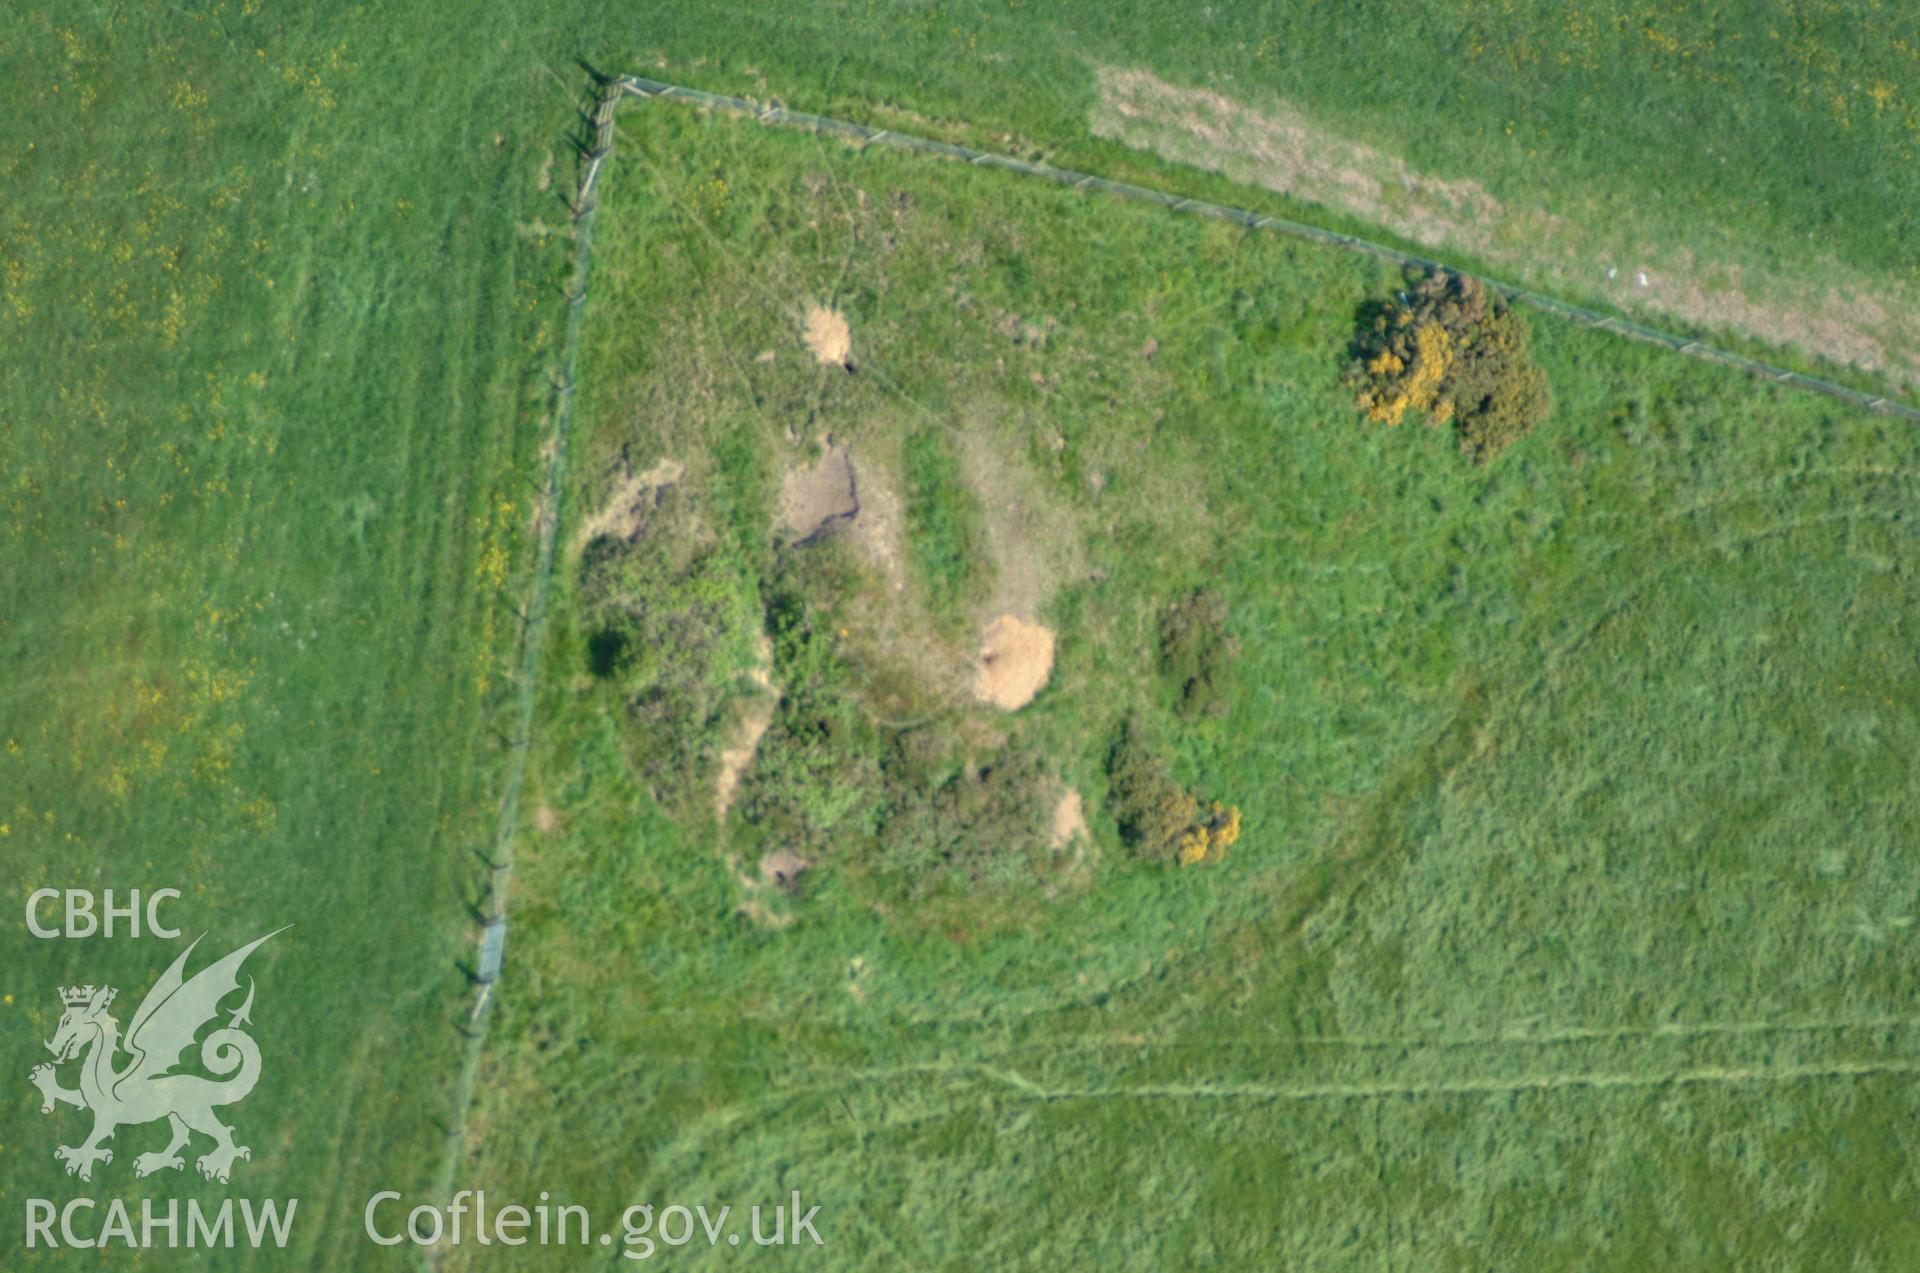 RCAHMW colour oblique aerial photograph of Pulmstone Mountain West Barrow II taken on 25/05/2004 by Toby Driver